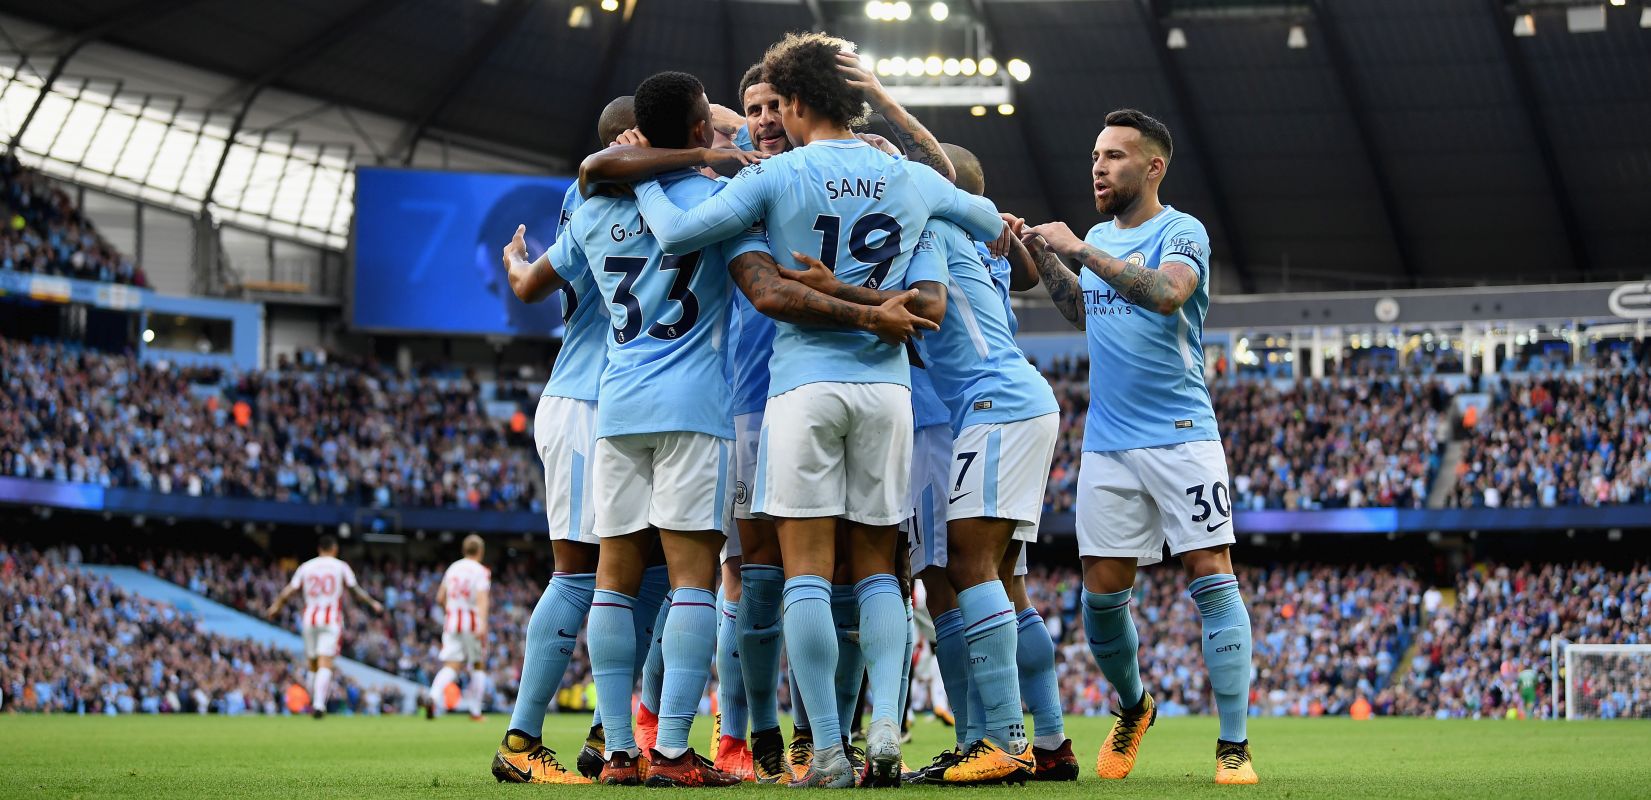  Manchester City will end Reds’ unbeaten run and Pep Guardiola’s side will win Premier League, Tony Cascarino says - Bóng Đá